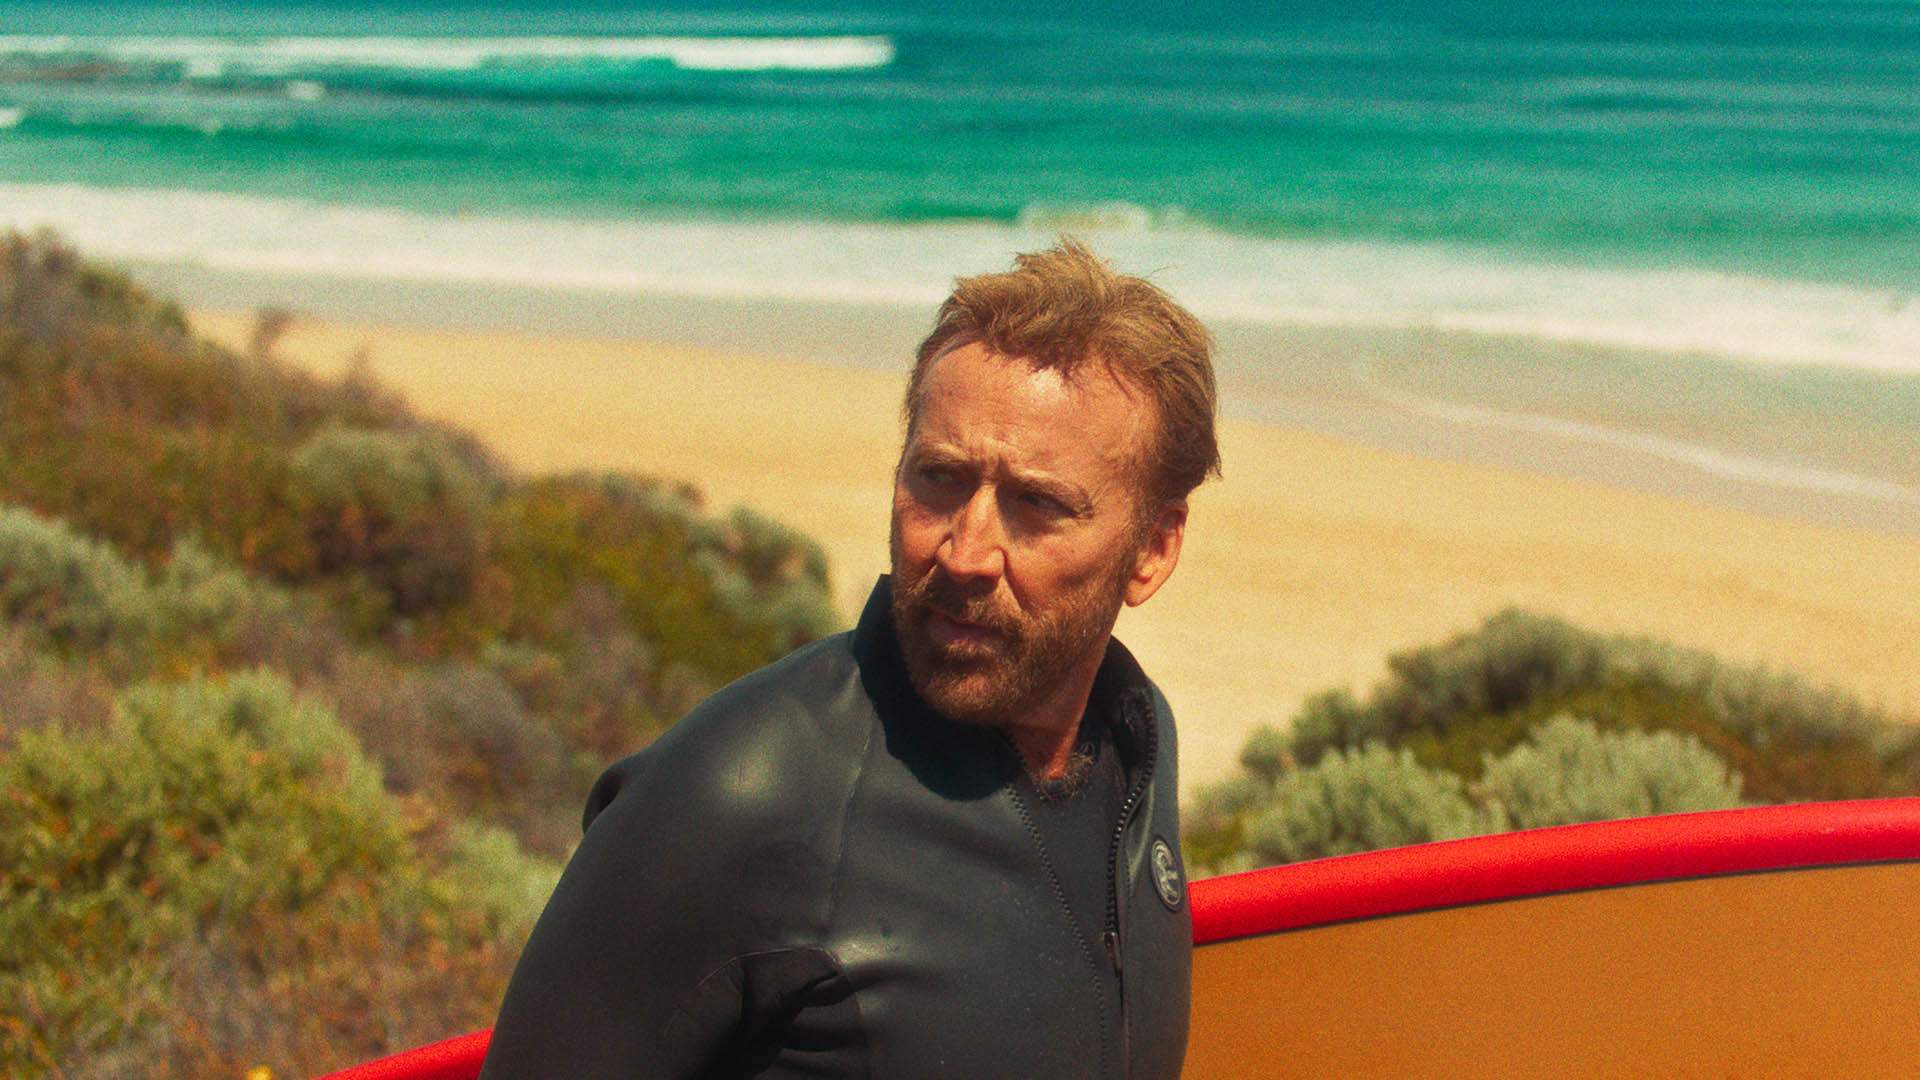 Nicolas Cage Wants His Surfboard Back in the Tense First Clip From Australian Thriller 'The Surfer'